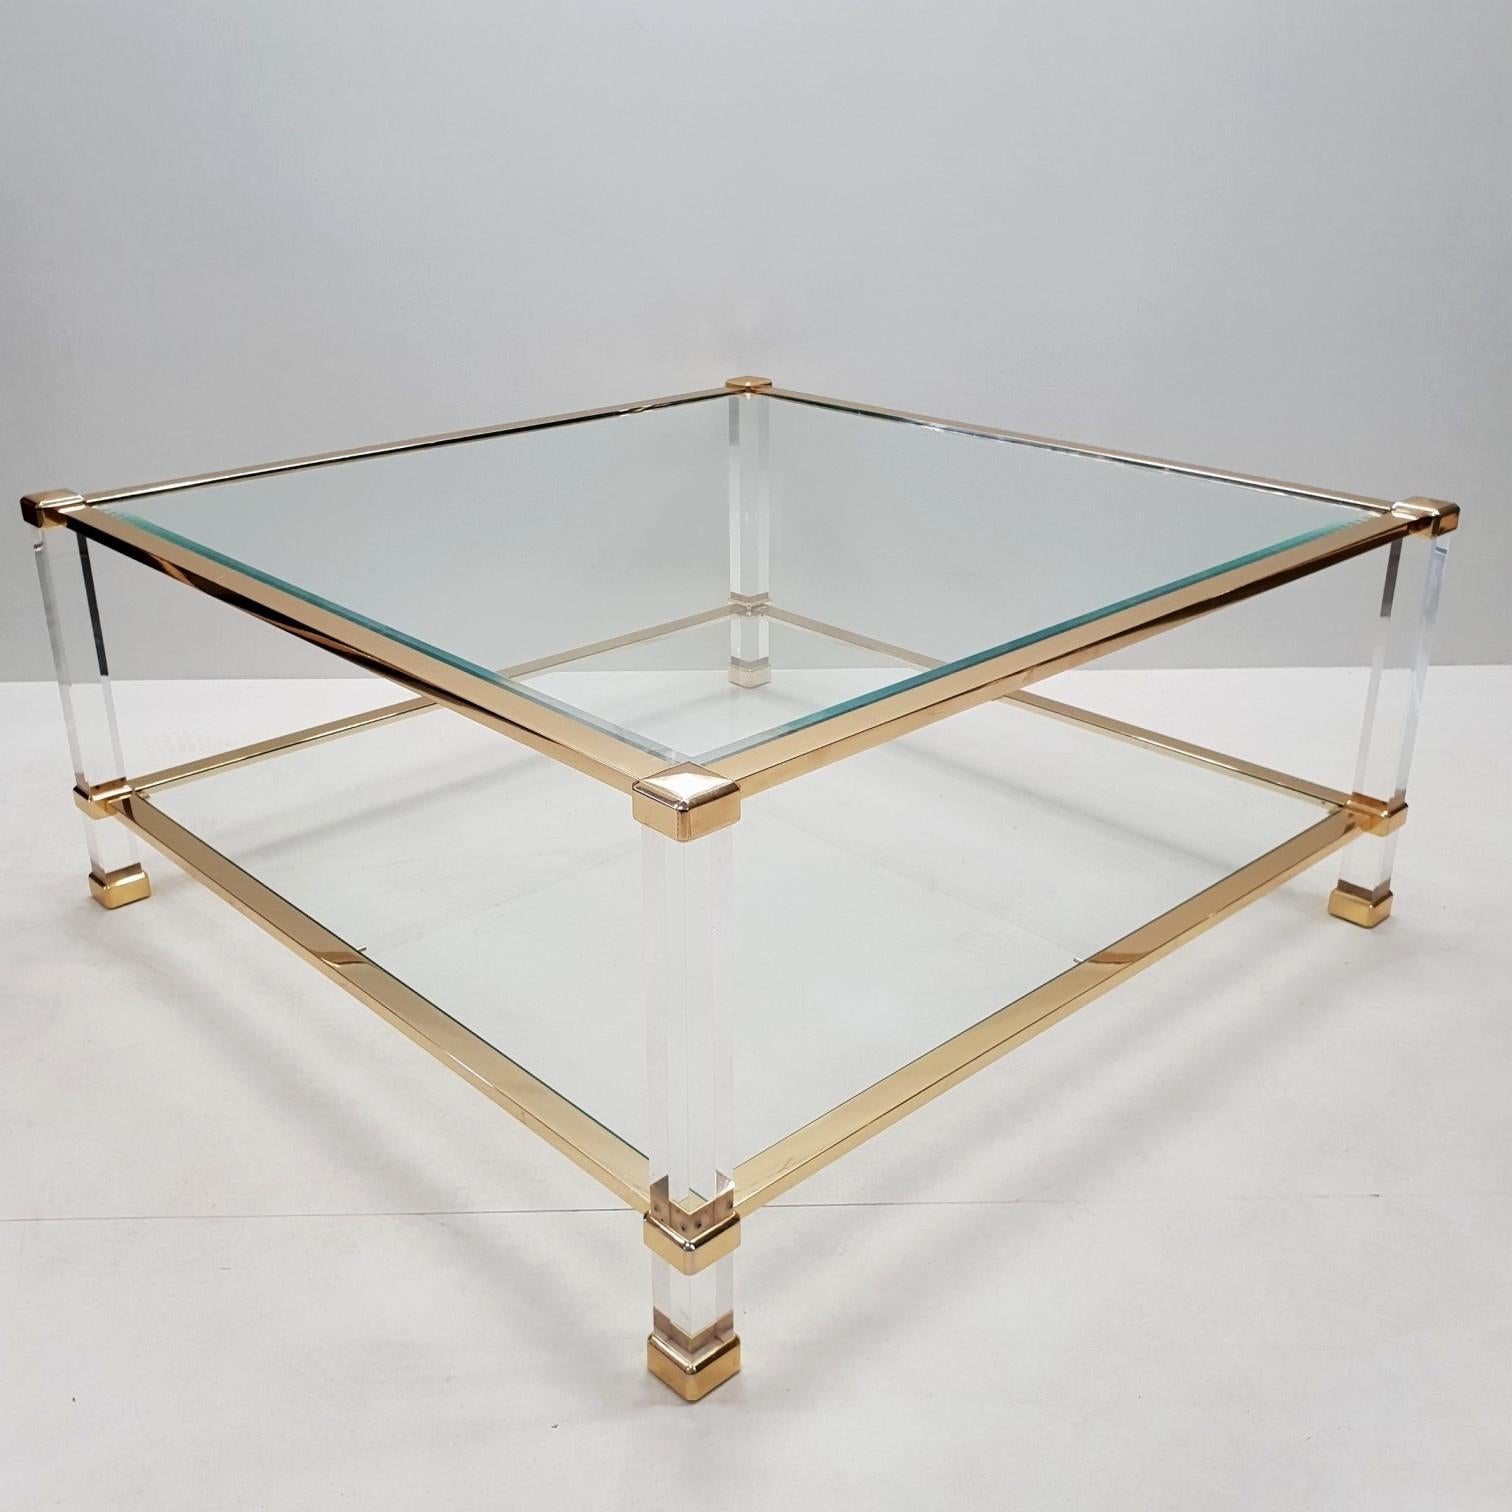 Metal Italian Lucite and Brass Square Coffee Table by Orsenigo, 1970s For Sale